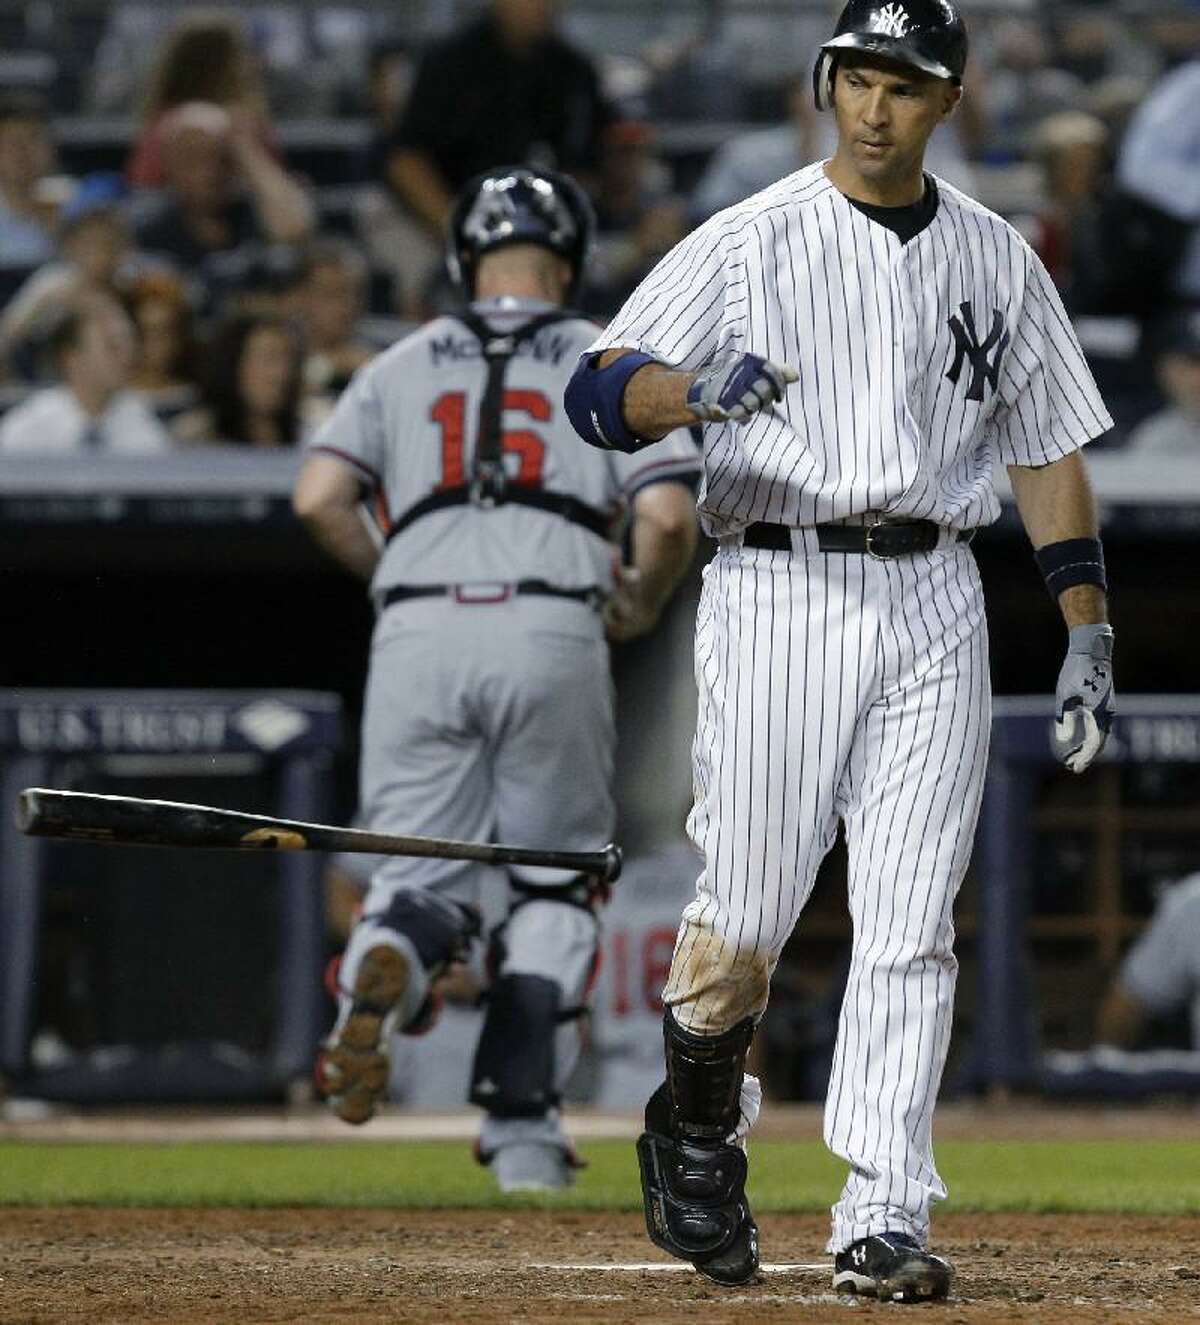 ASSOCIATED PRESS New York Yankees Raul Ibanez tosses his bat after a seventh-inning strikeout as Atlanta Braves catcher Brian McCann returns to the dugout during Tuesday night's game at Yankee Stadium in New York. The Yankees lost 4-3. Ibanez stranded two runners on base on his strikeout.